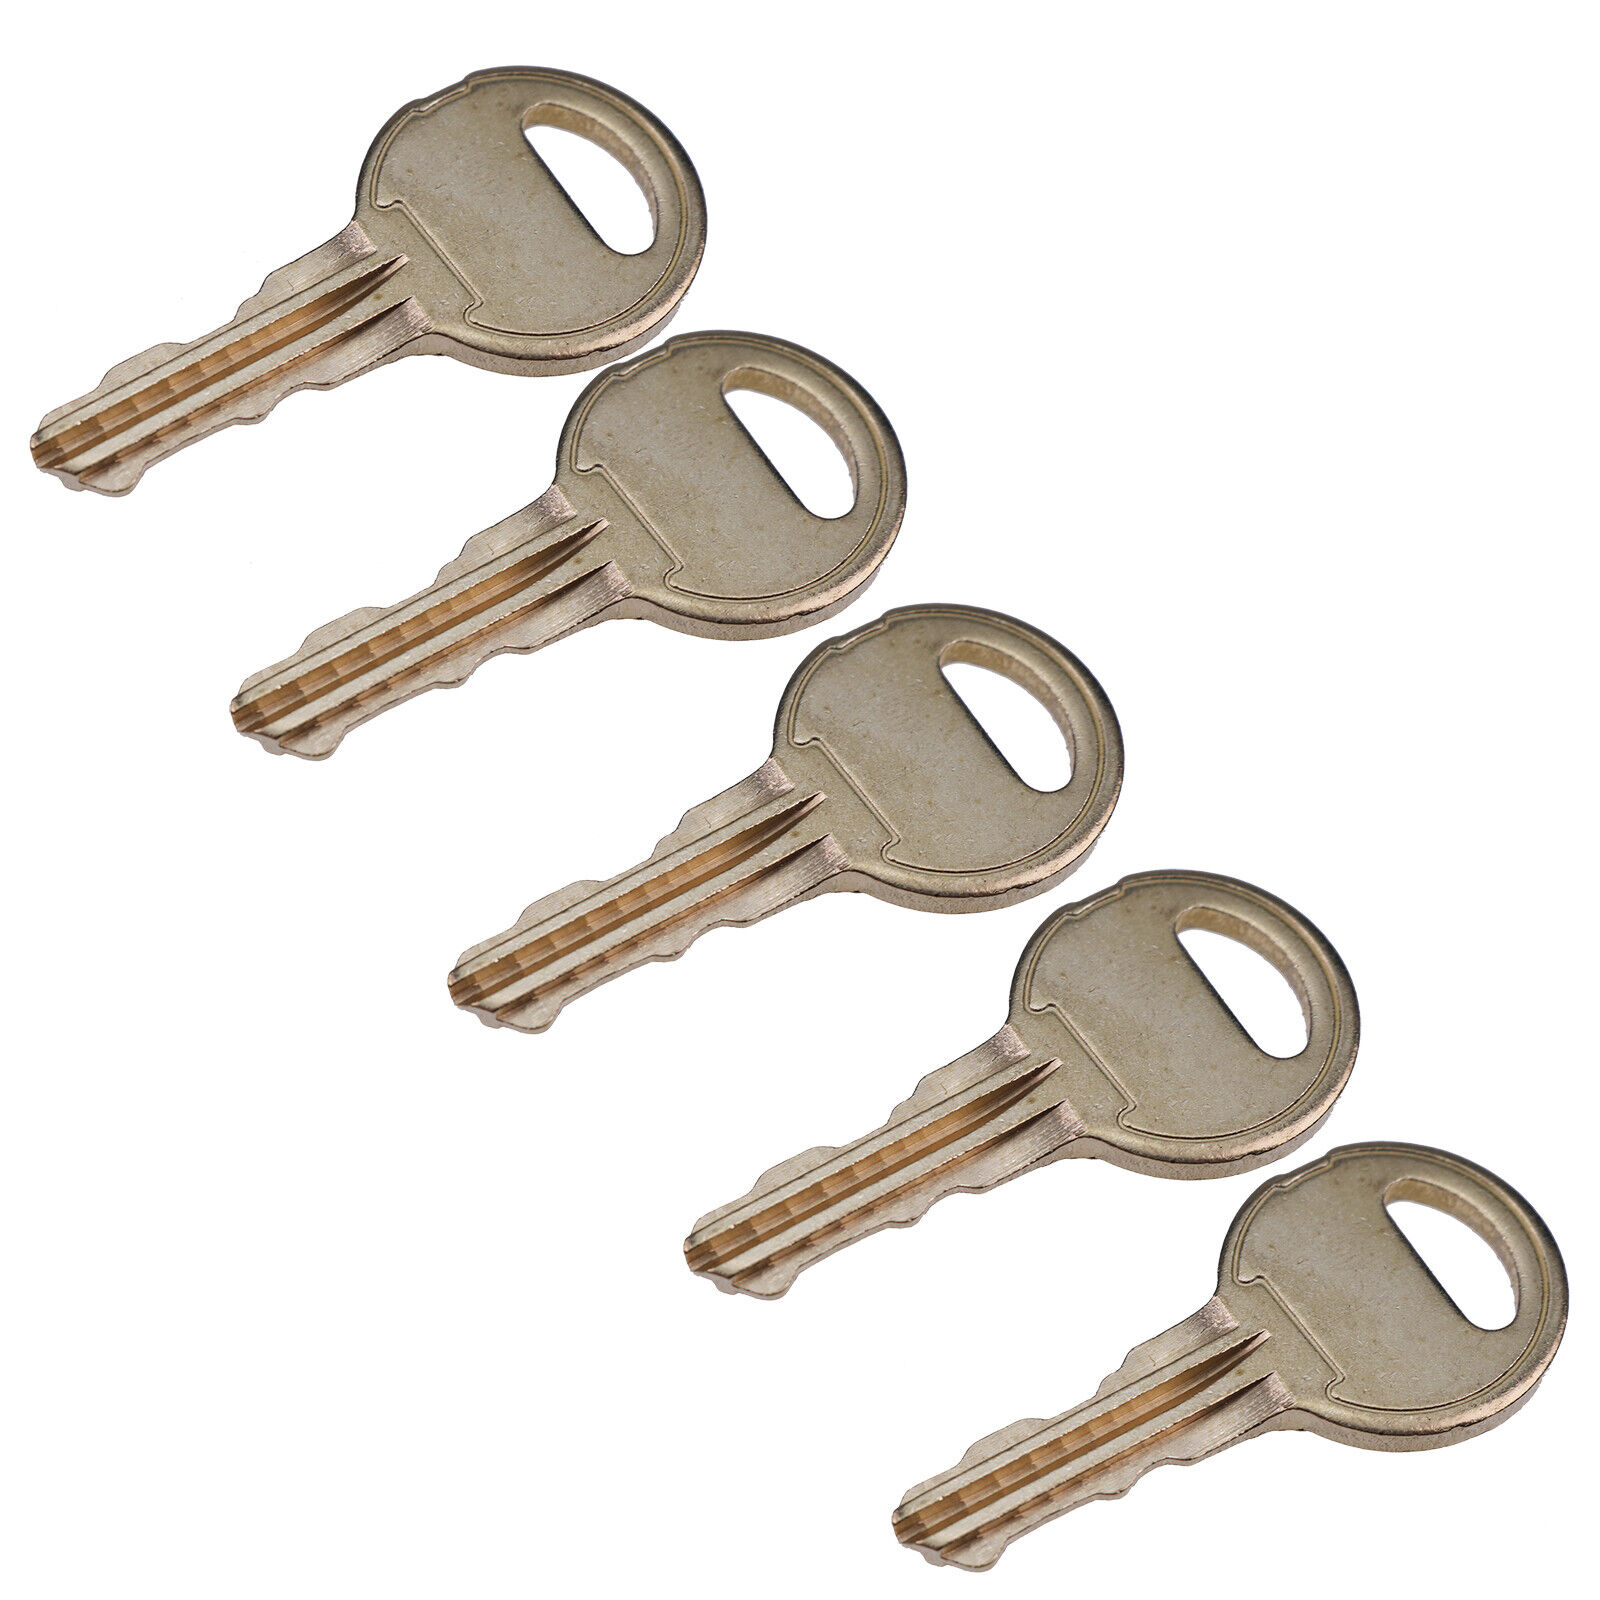 5x New Key 16120 Compatible With All Doorking Equipment With High Quality